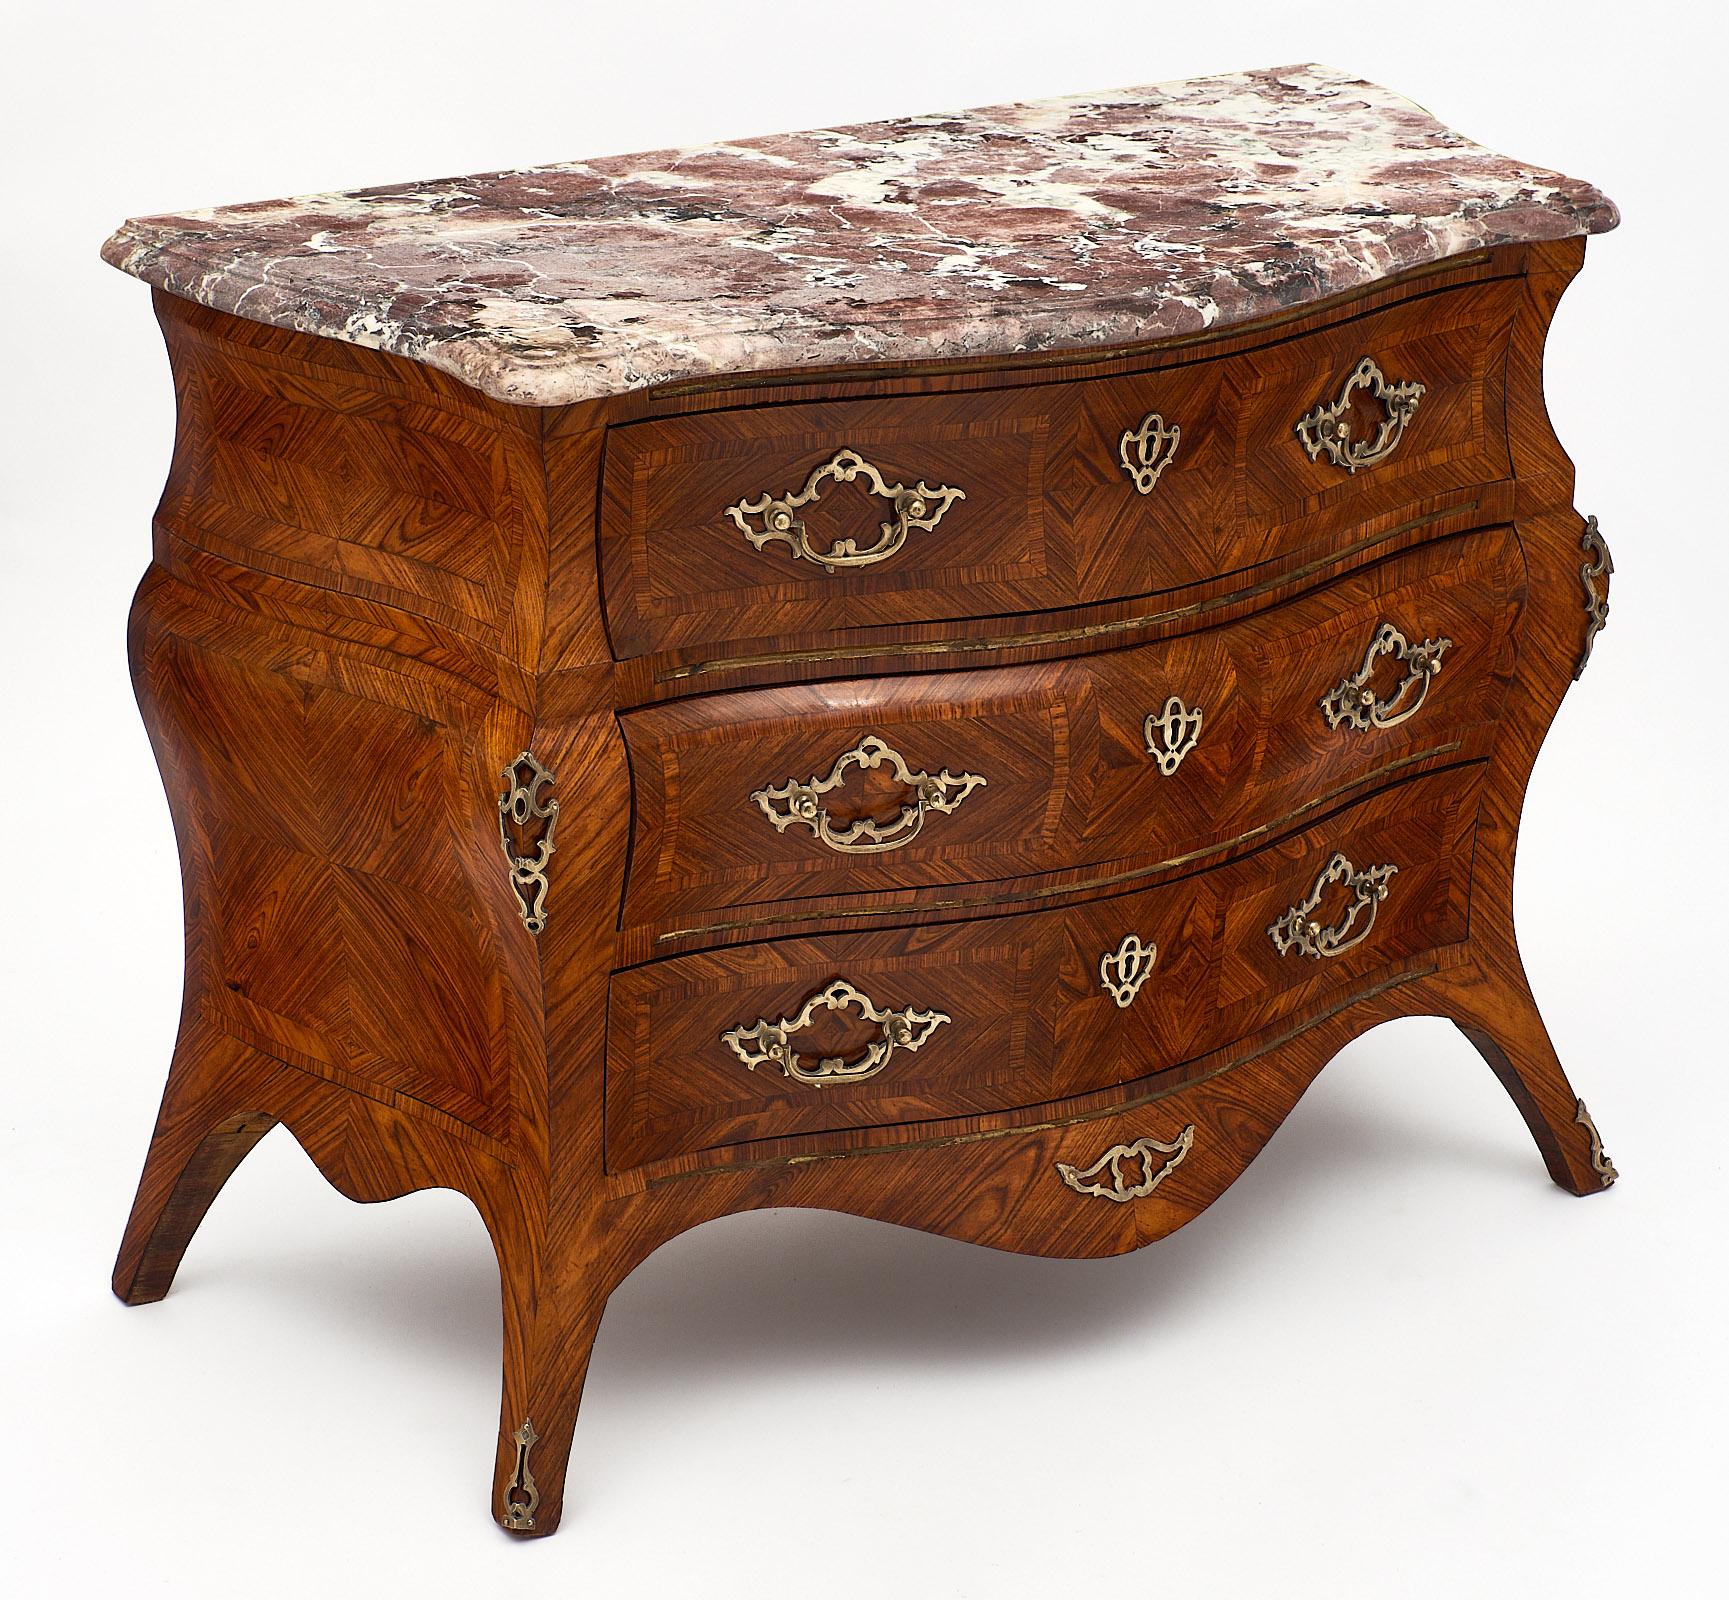 French Régence style chest of drawers with original Rouge Royal marble top. We love the serpentine shape of this piece with convex and concave curves on the sides and drawers. It is made of rosewood with tinted rosewood parquetry. The hardware is